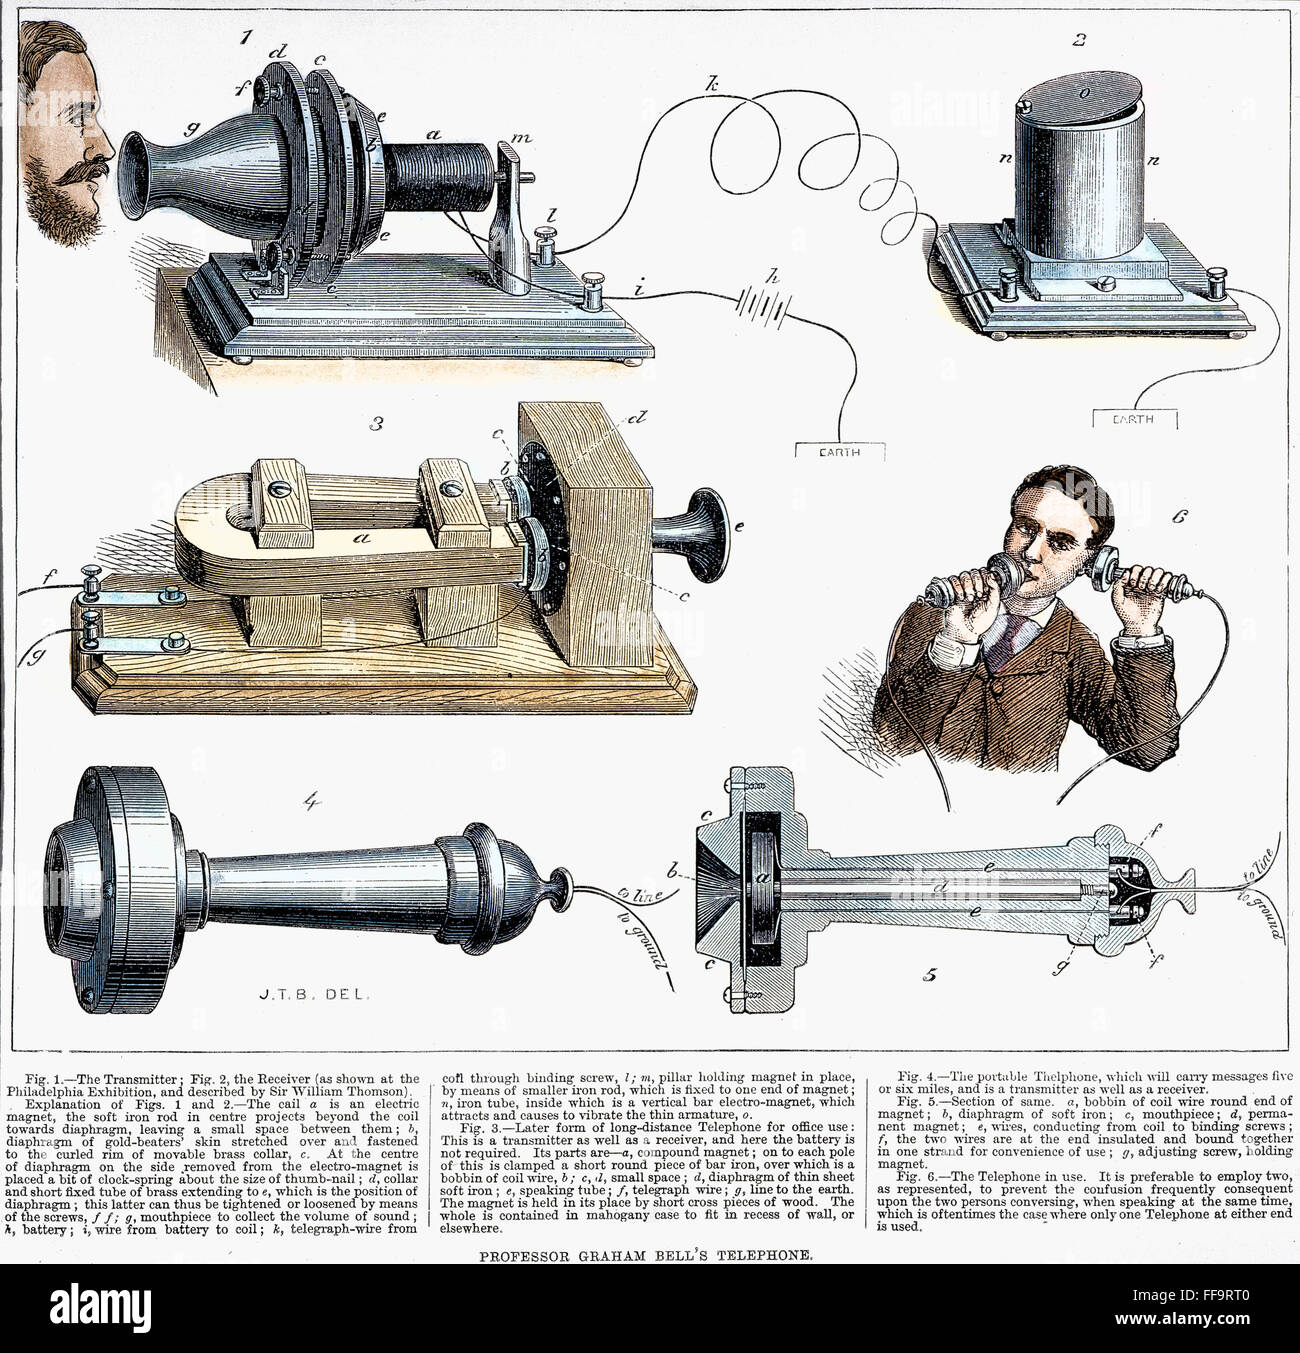 BELL: TELEPHONE, 1877. /nThe telephone, Alexander Graham Bell's invention. Patented in 1876, as described in an English newspaper of 1877. Stock Photo